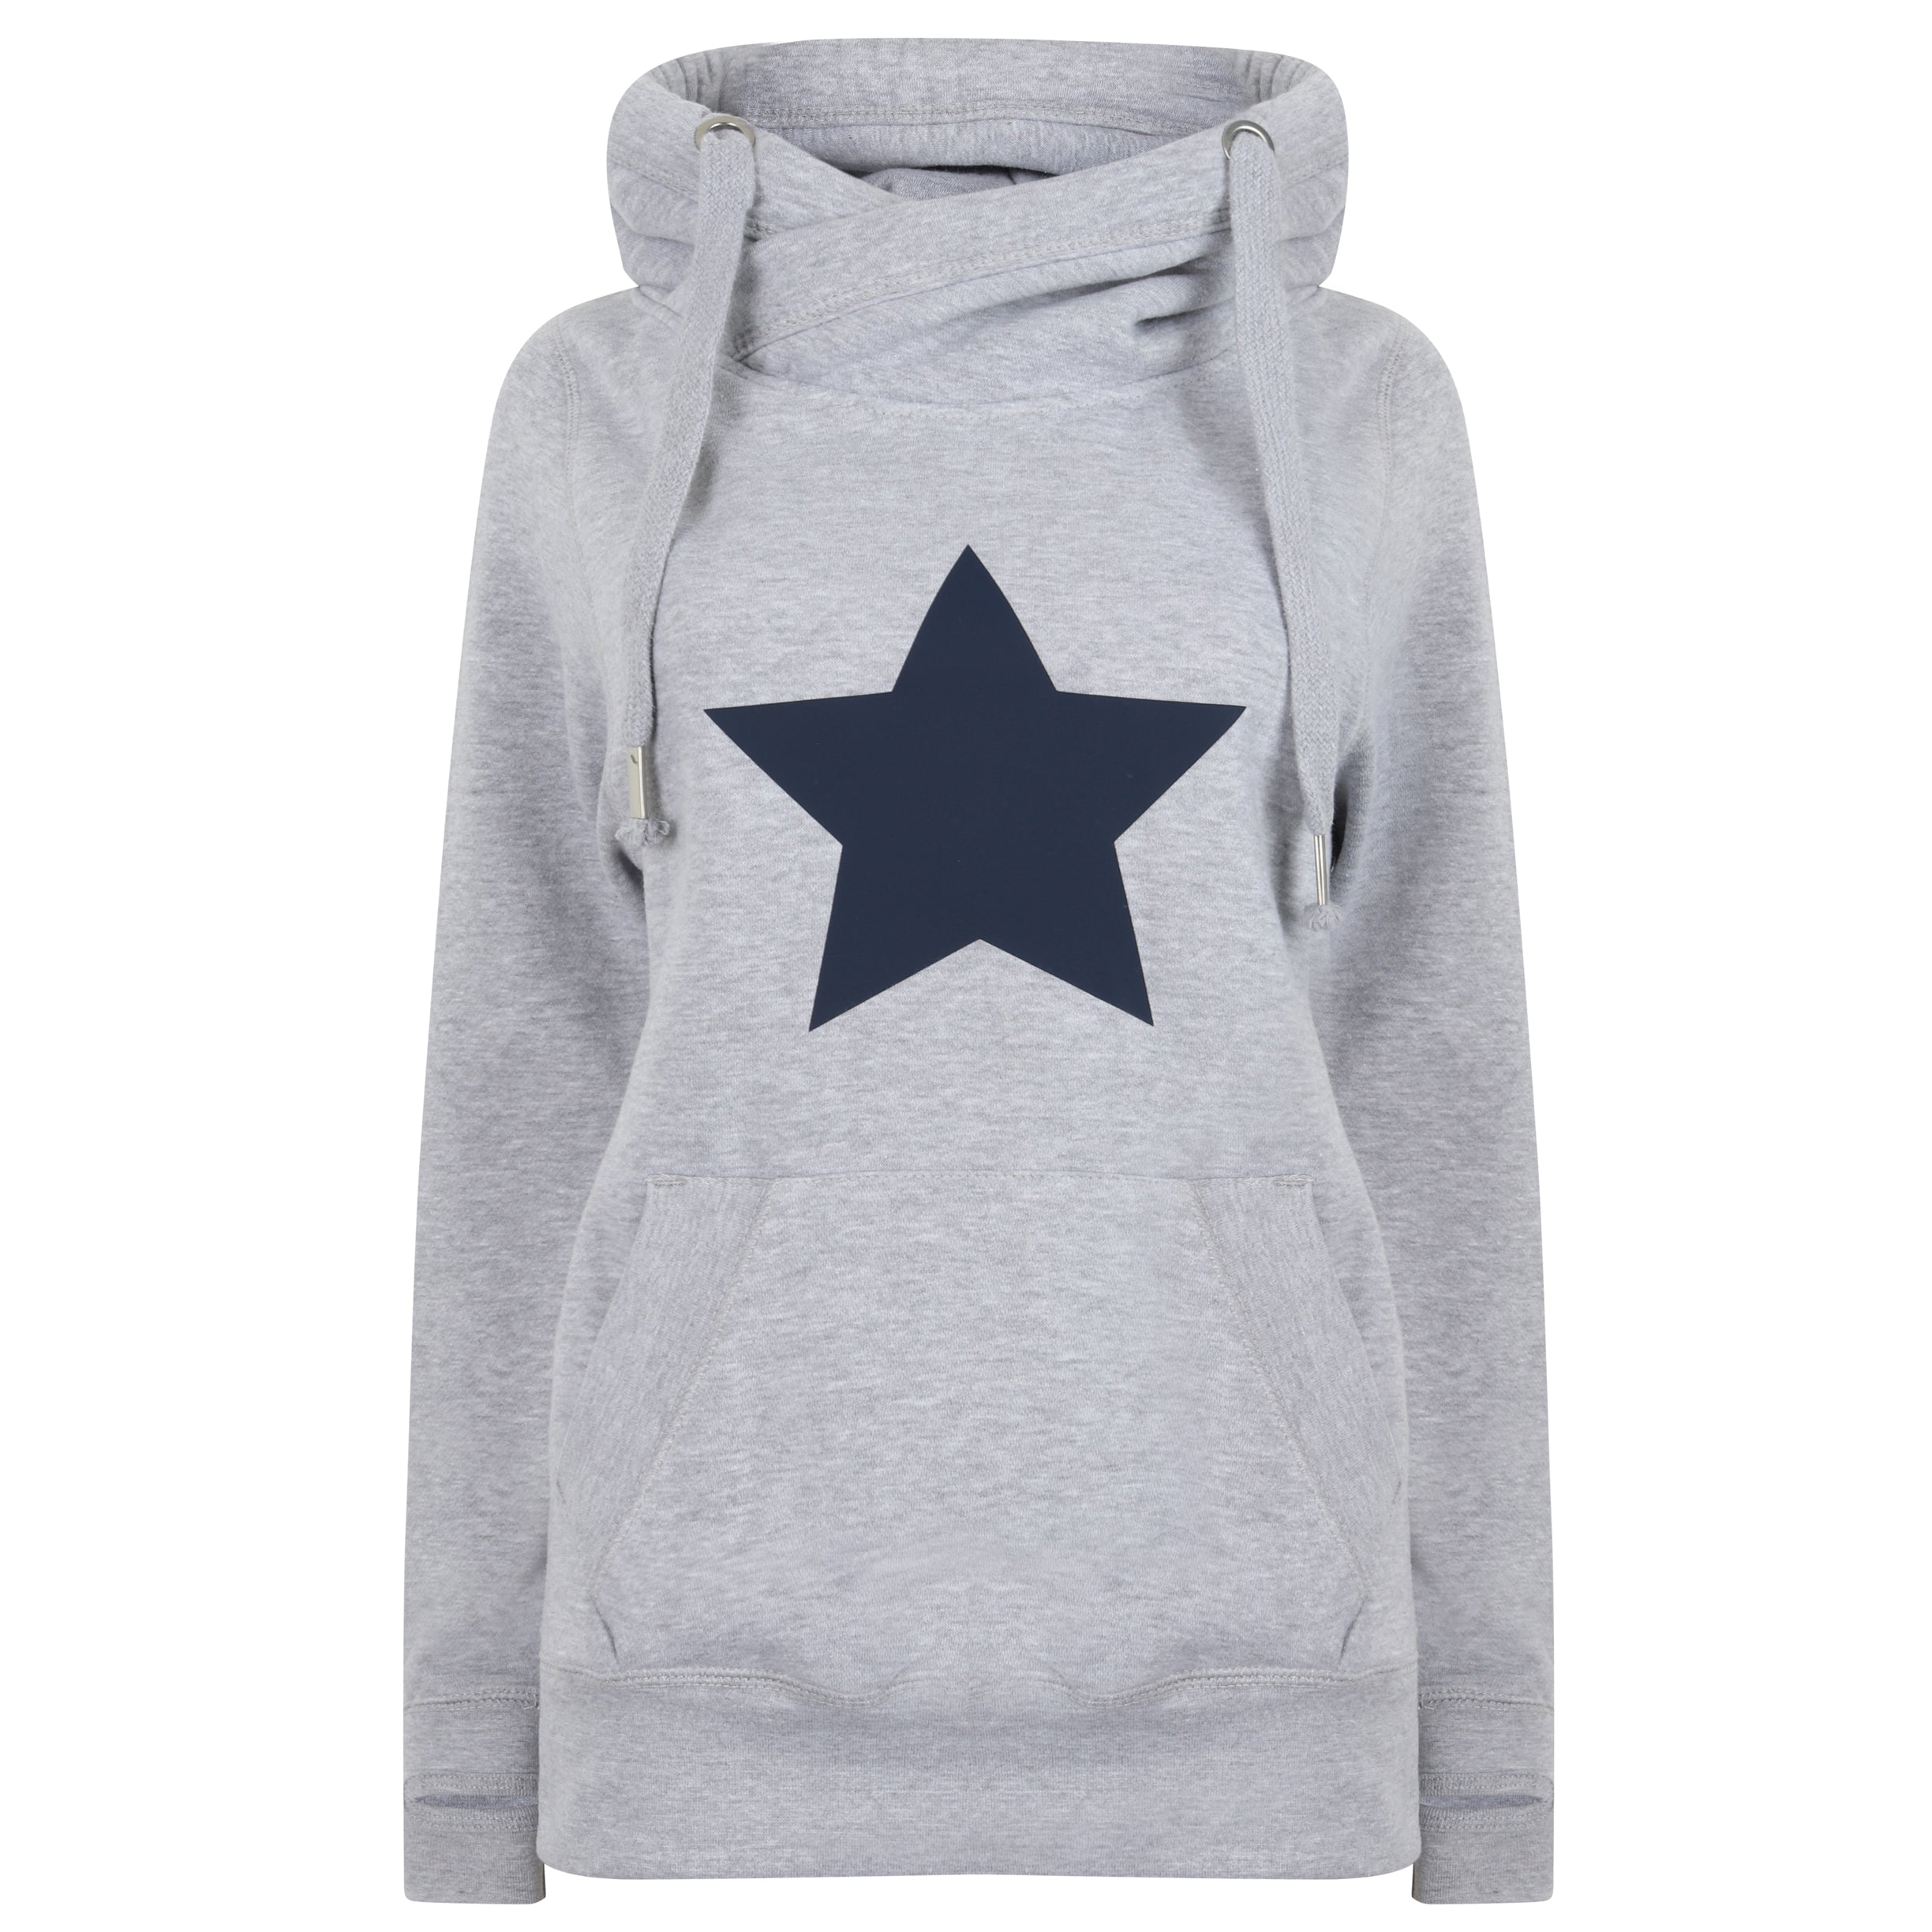 Grey Luxe Hoodie with Navy Star